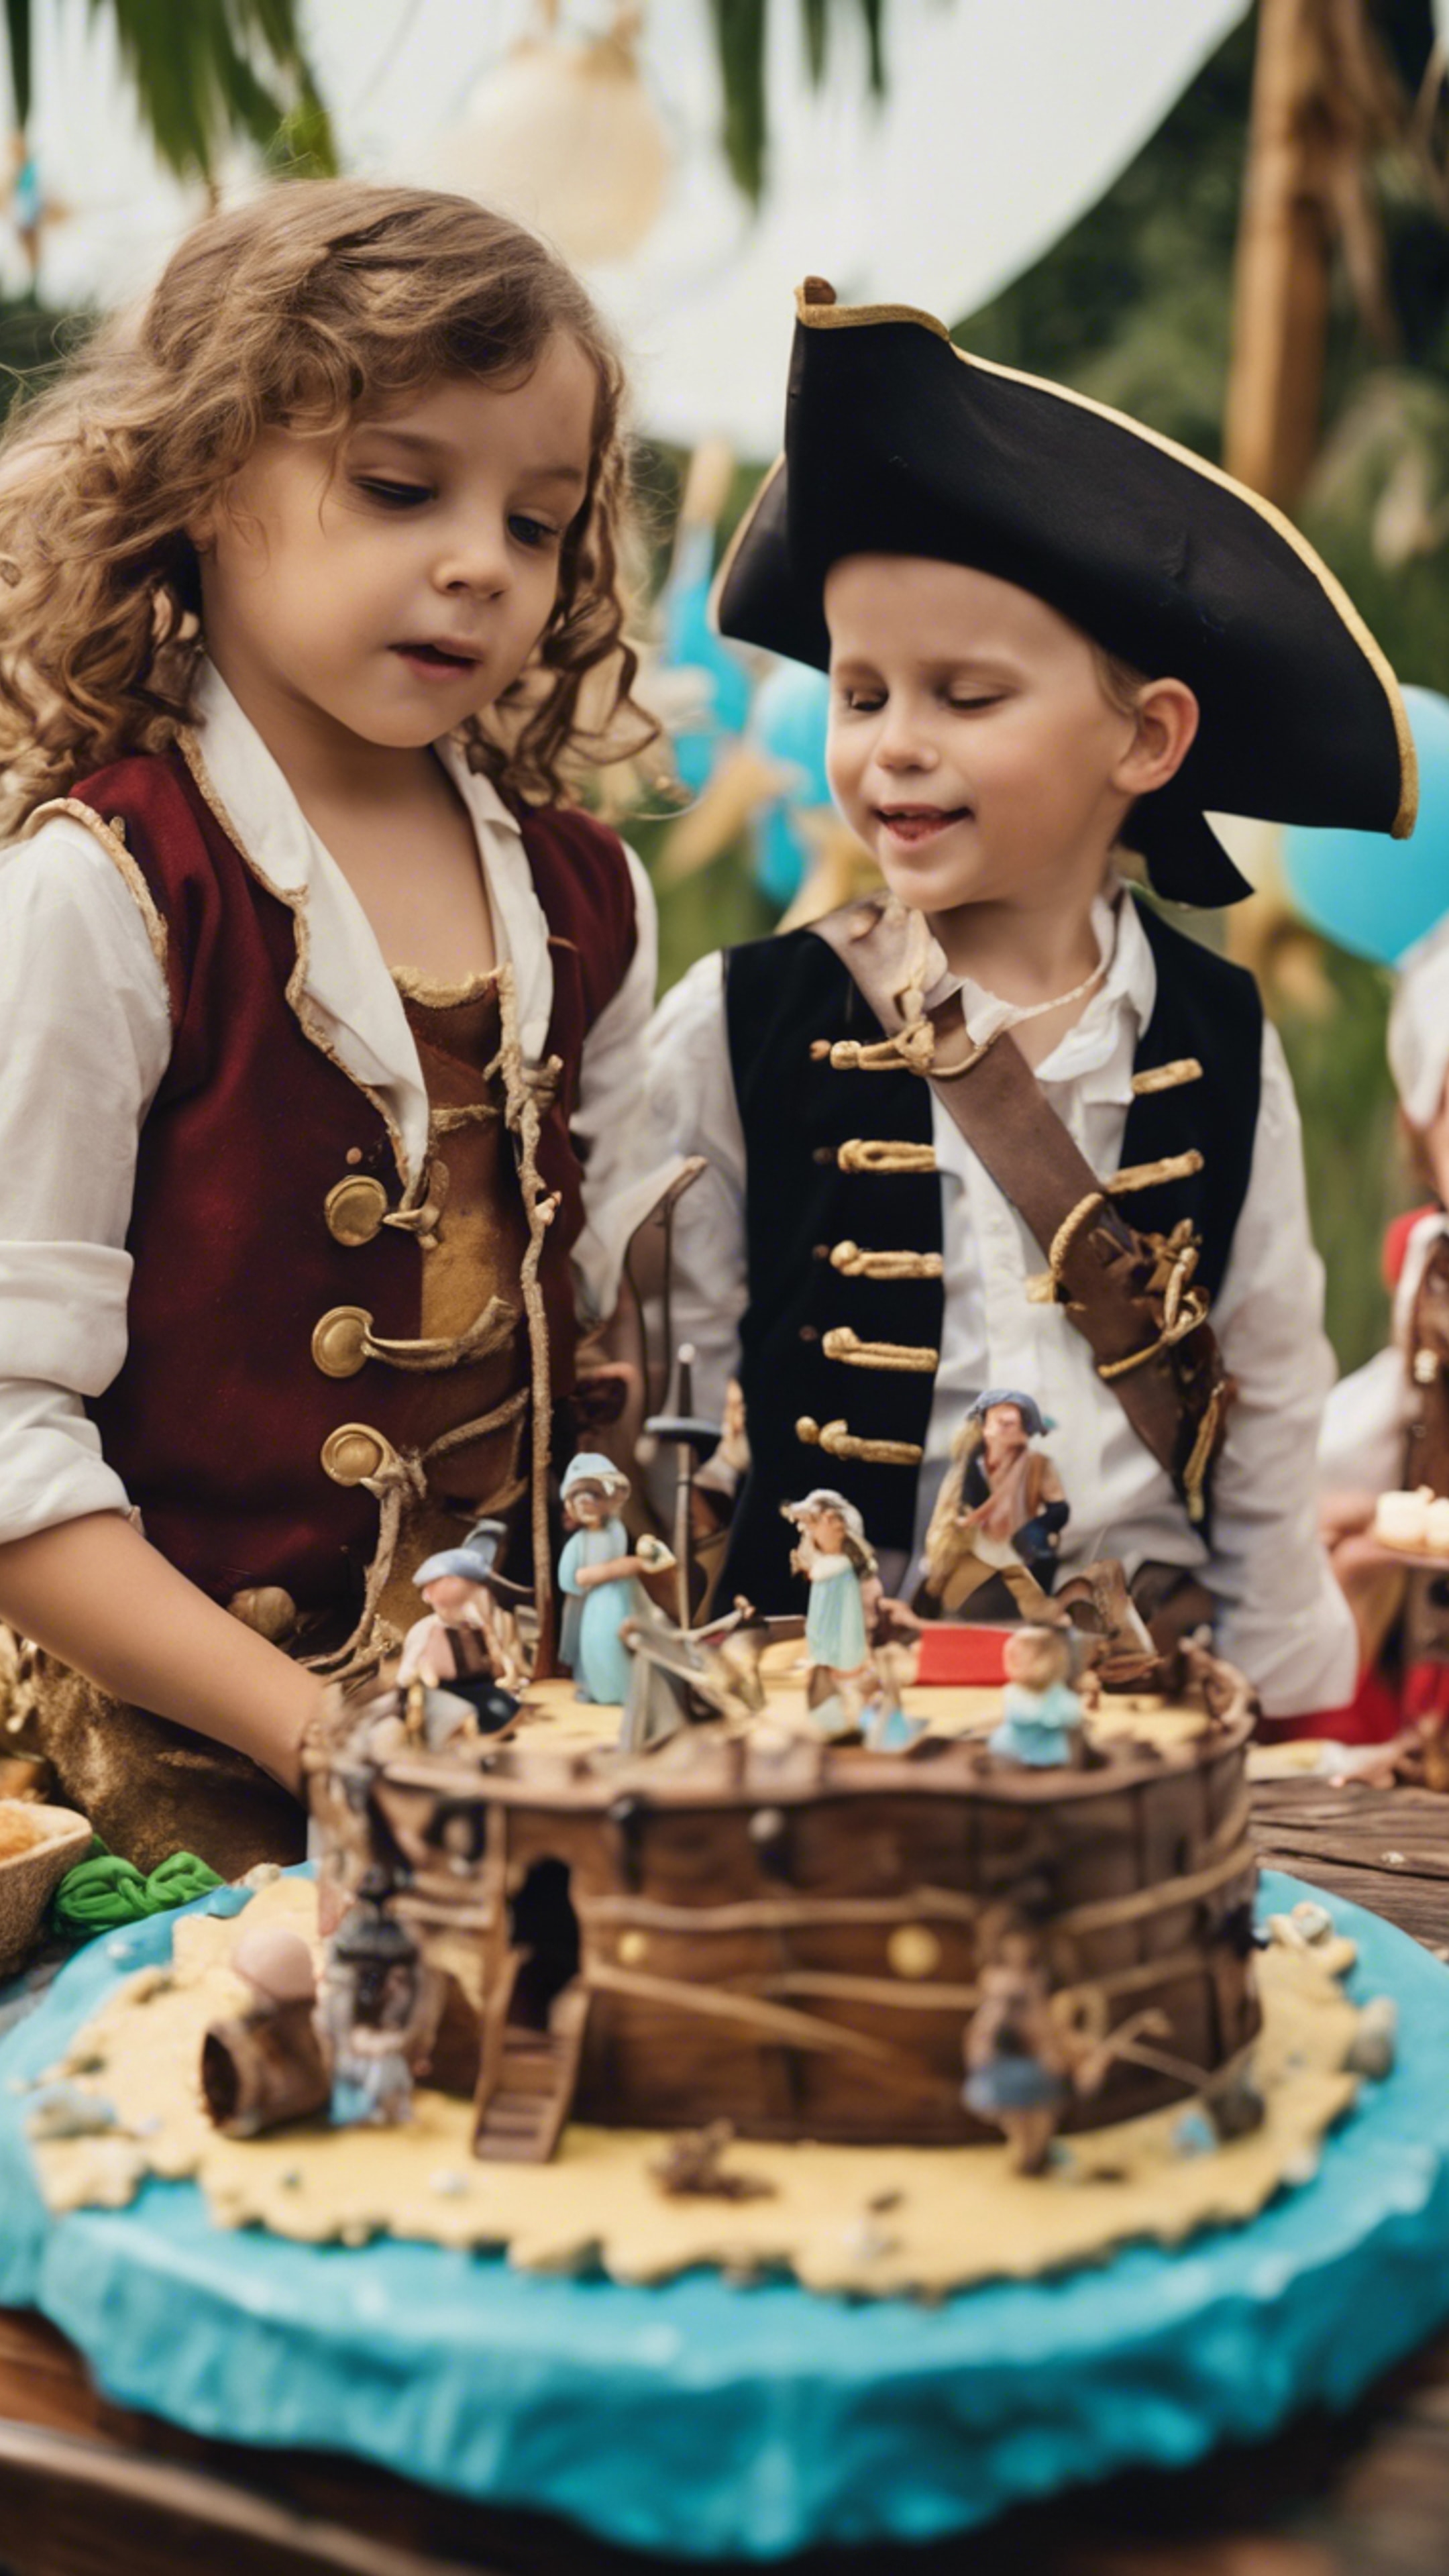 Children's pirate-themed birthday party with a treasure map, pirate ship cake and kids dressed as pirates. Шпалери[fc1a6e05b86643309d7a]